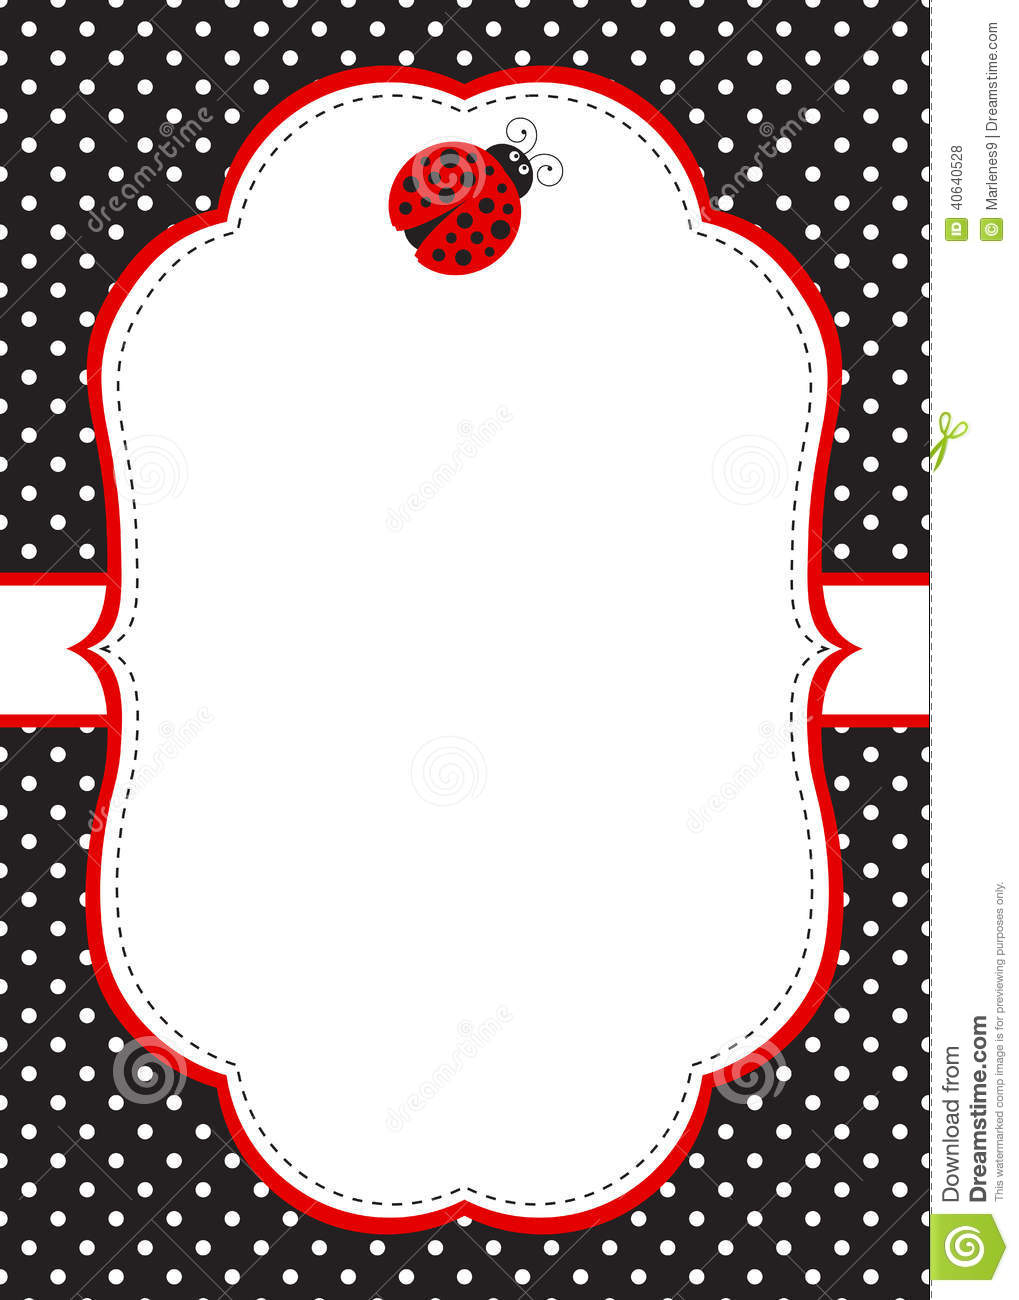 Ladybug Invitation Template Stock Vector Illustration Of Birthday for proportions 1019 X 1300